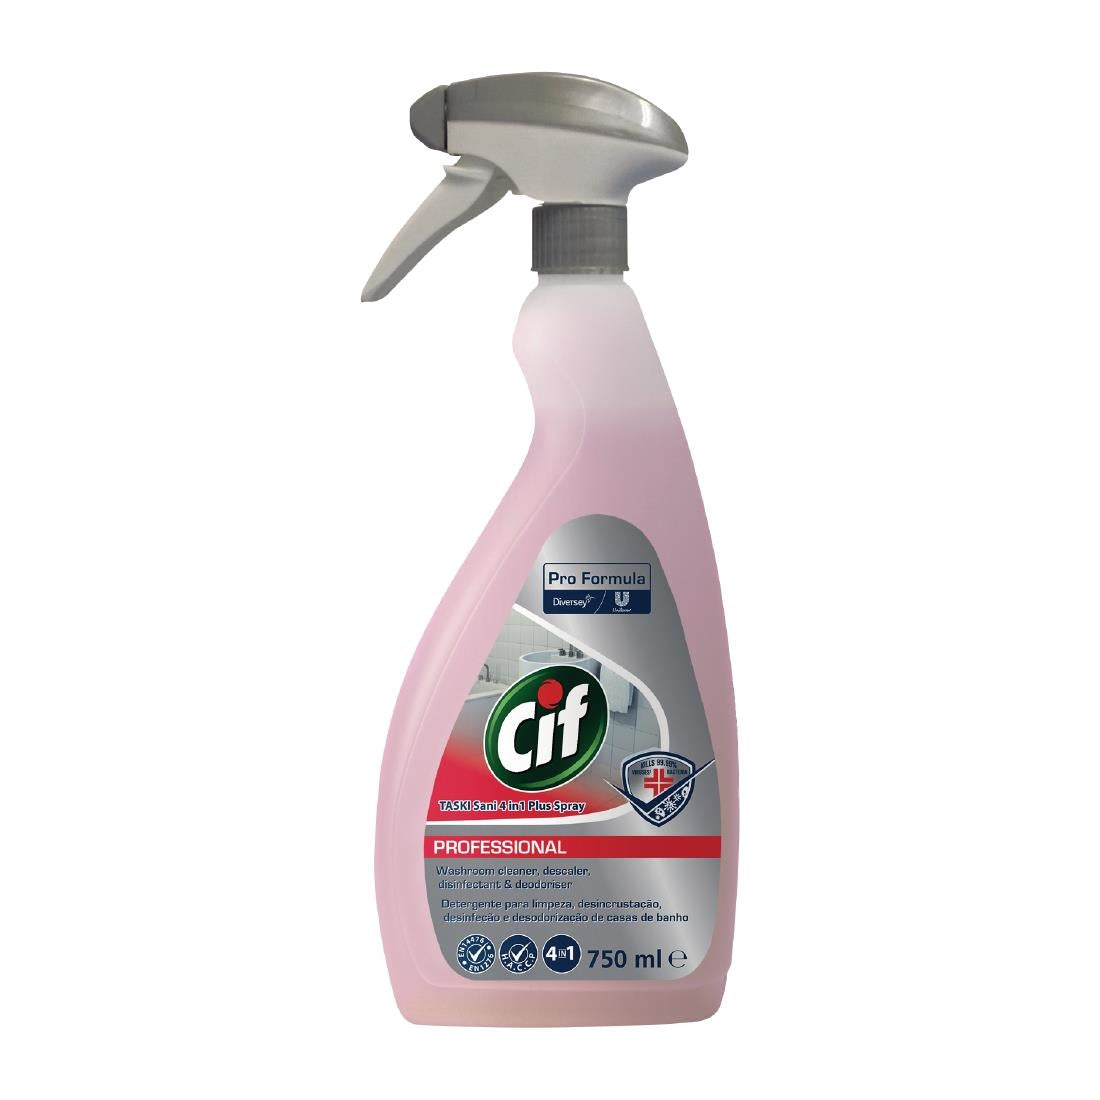 CX872 Cif Pro Formula 4-in-1 Washroom Cleaner and Disinfectant Ready To Use 750ml JD Catering Equipment Solutions Ltd